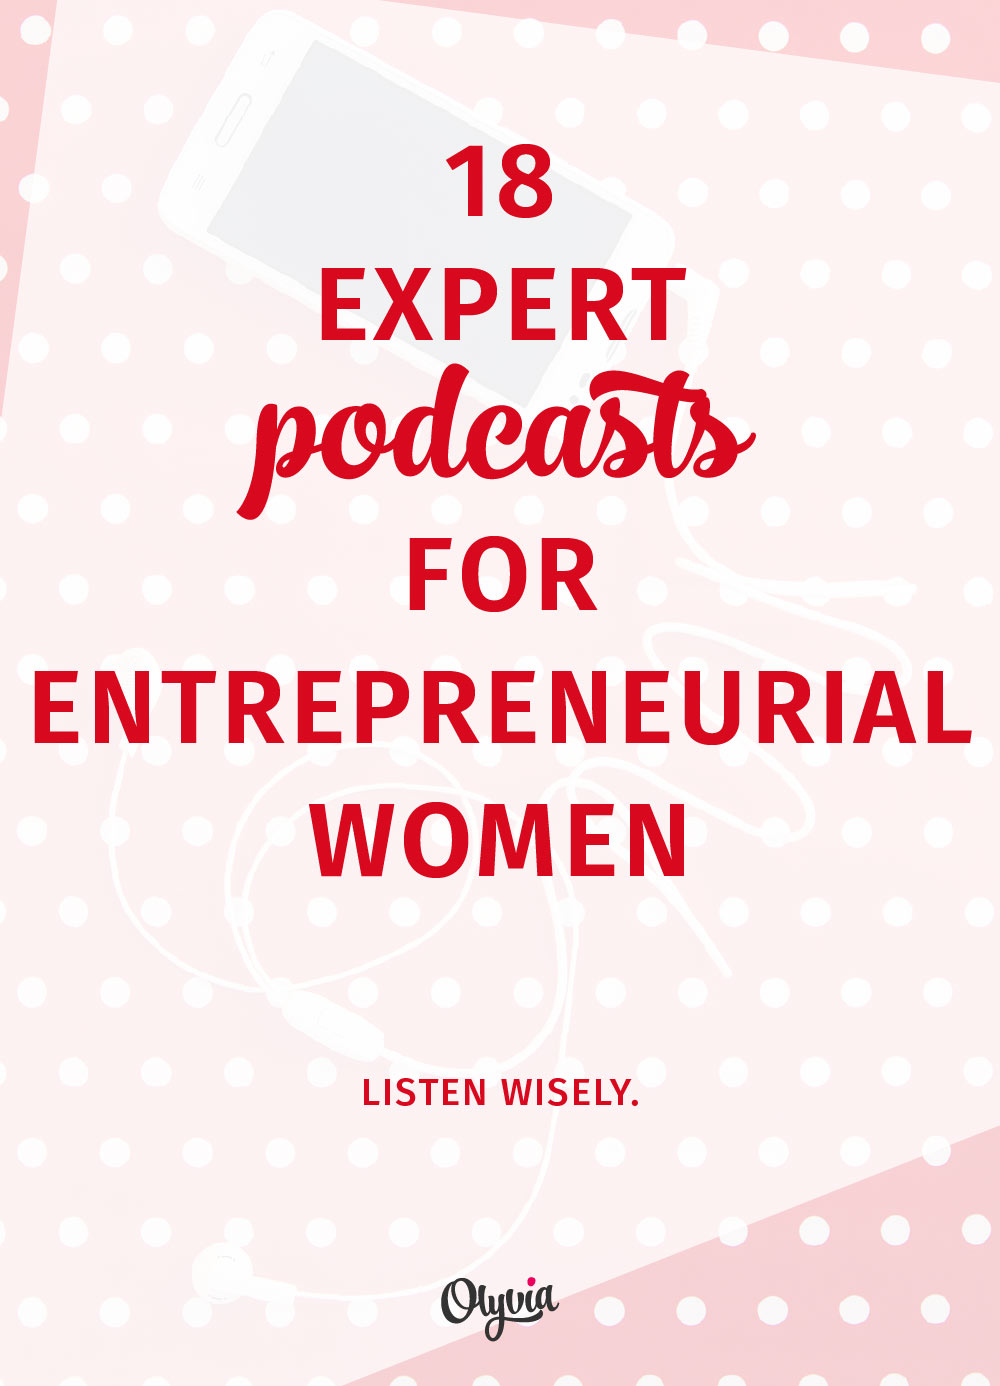 18 expert podcasts for women entrepreneurs. You should be listening to these!